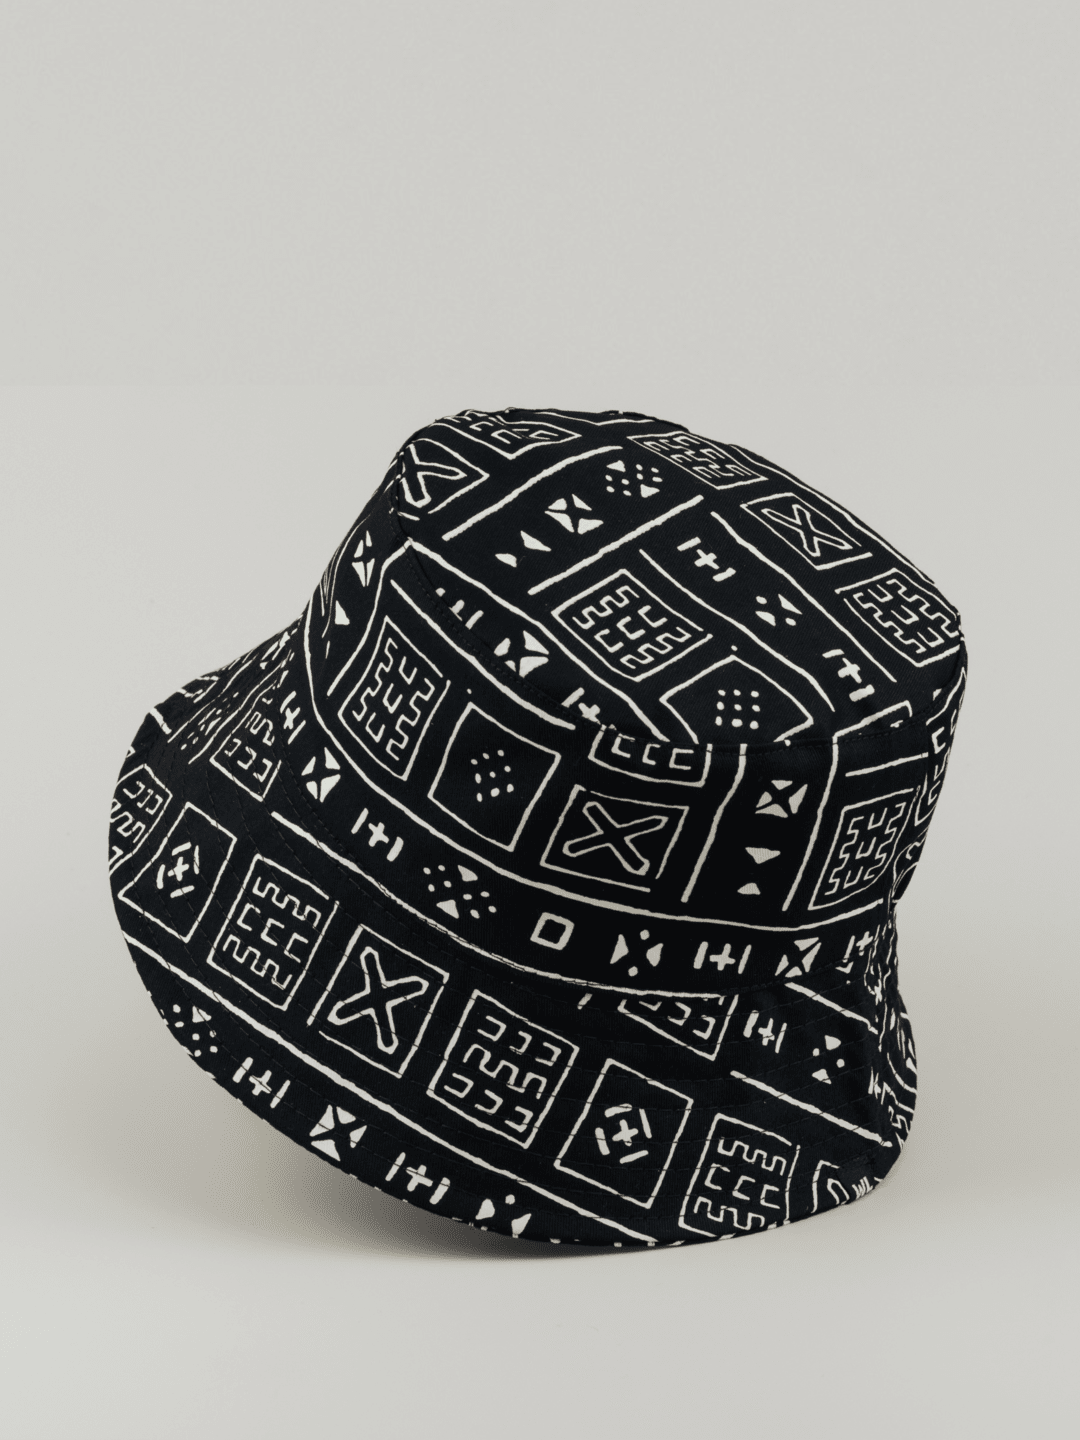 The Wrap Life Satin Lined Printed Bucket Hat in Black Black Hat